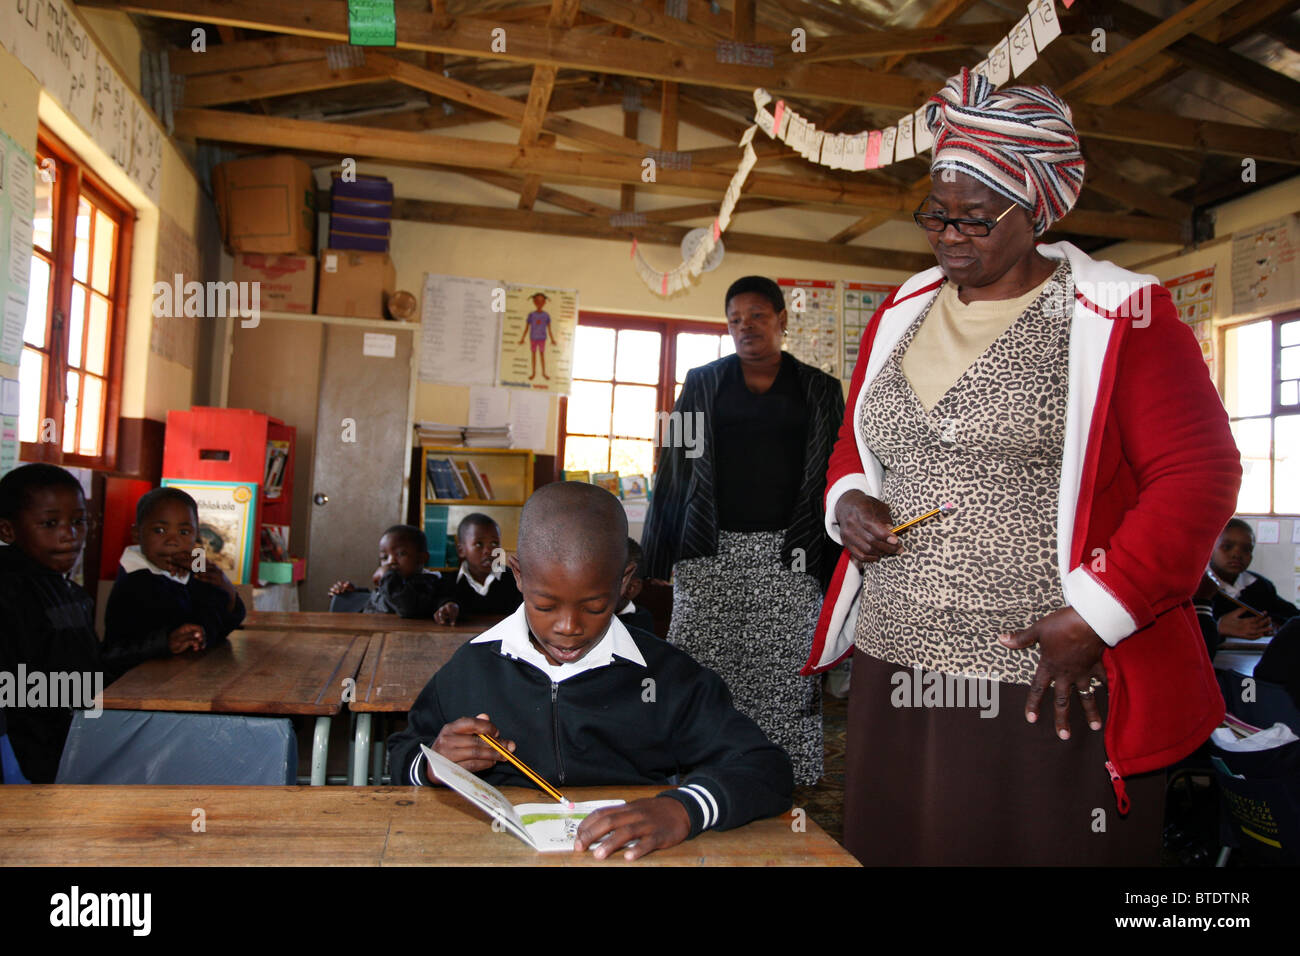 Young school boy reading while his teacher looks on in a rural Kwazulu Natal school Stock Photo